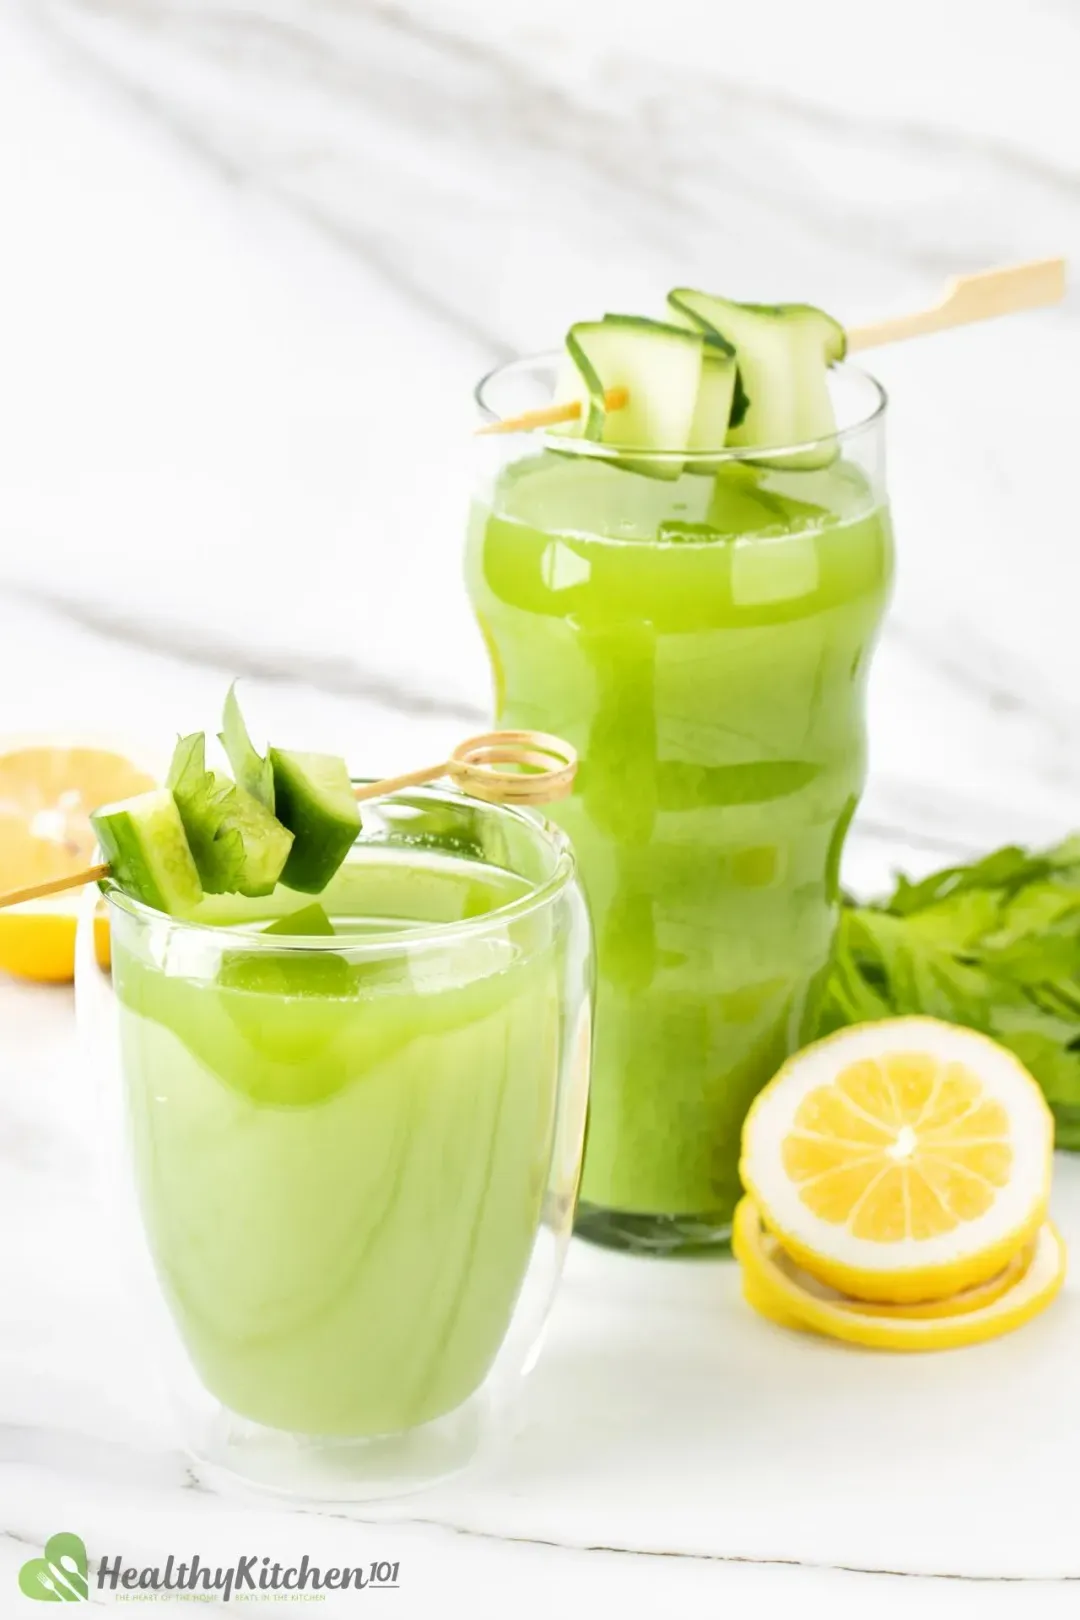 Two glasses of cucumber celery drink, each with a skewered strand of cucumber slice on top and next to some lemon wheels